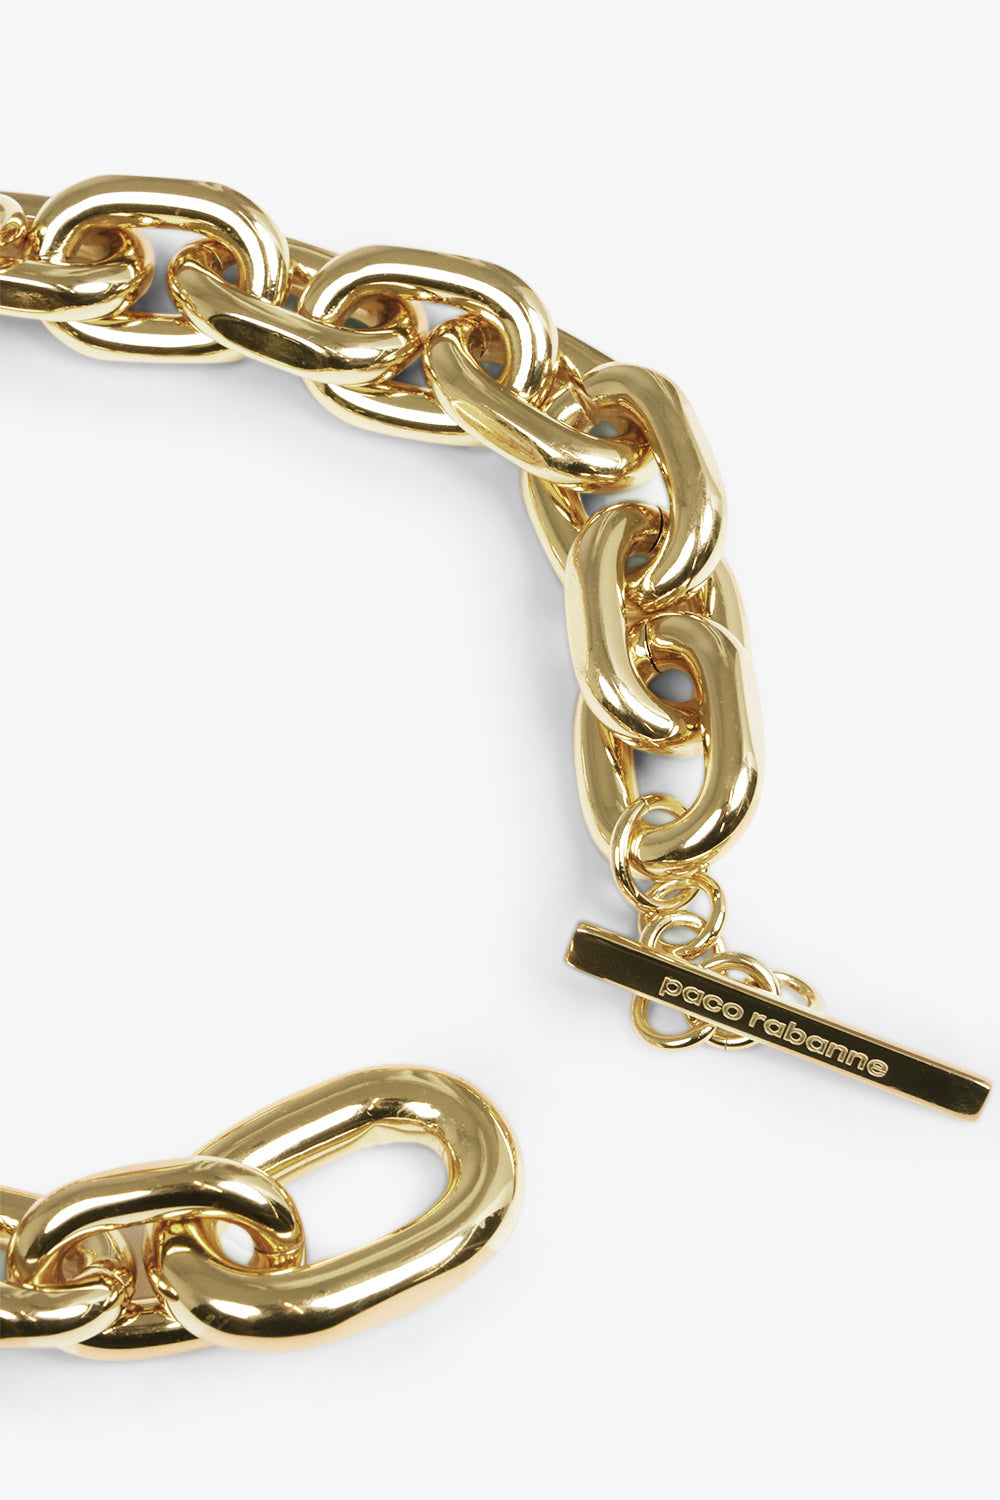 PACO RABANNE JEWELLERY GOLD XL LINK NECKLACE | GOLD